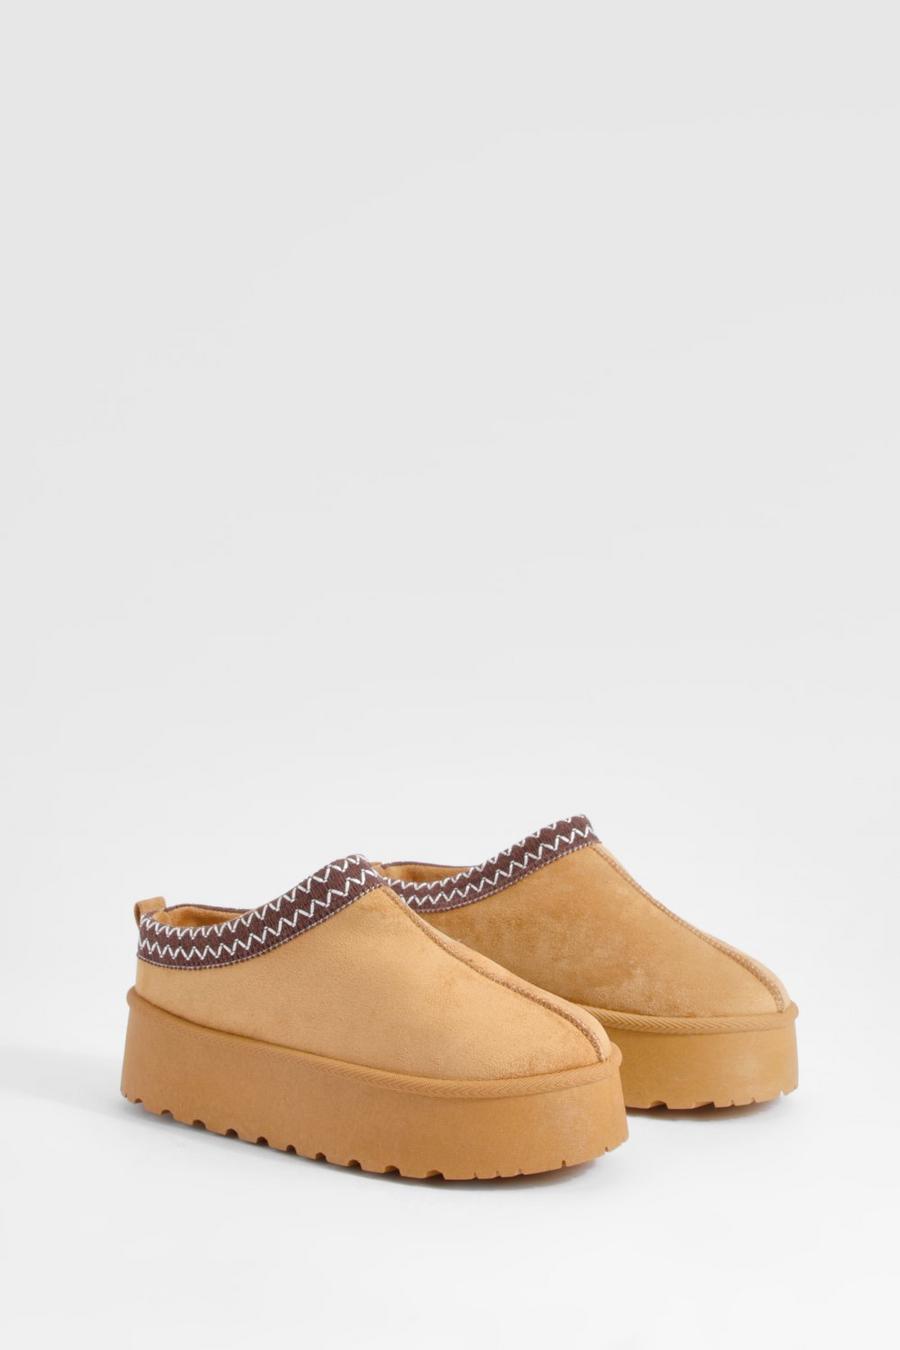 Chestnut Platform Embroidered Cosy Mules    